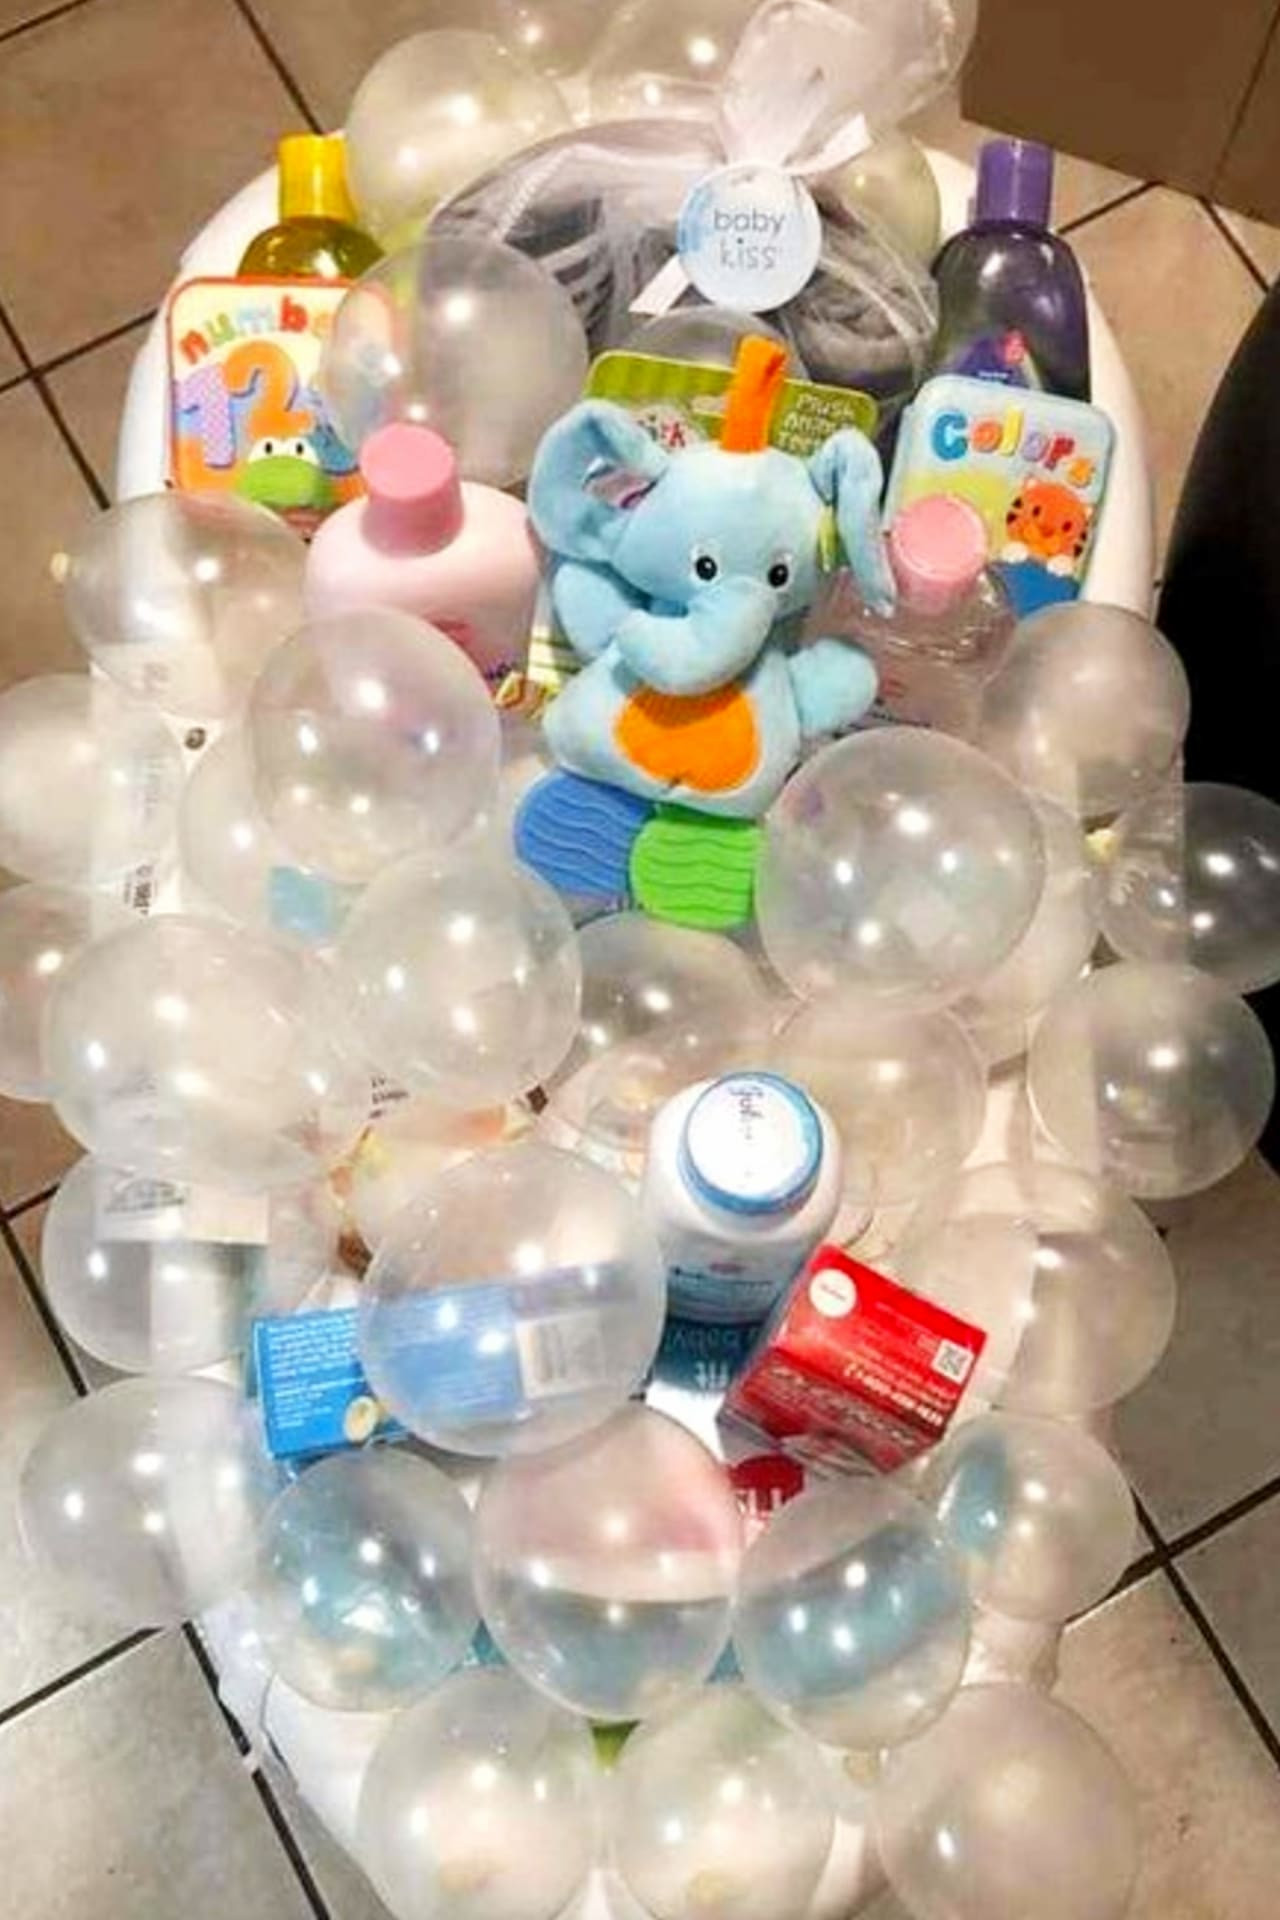 Baby Bath Tub Gift Ideas
 28 Affordable & Cheap Baby Shower Gift Ideas For Those on